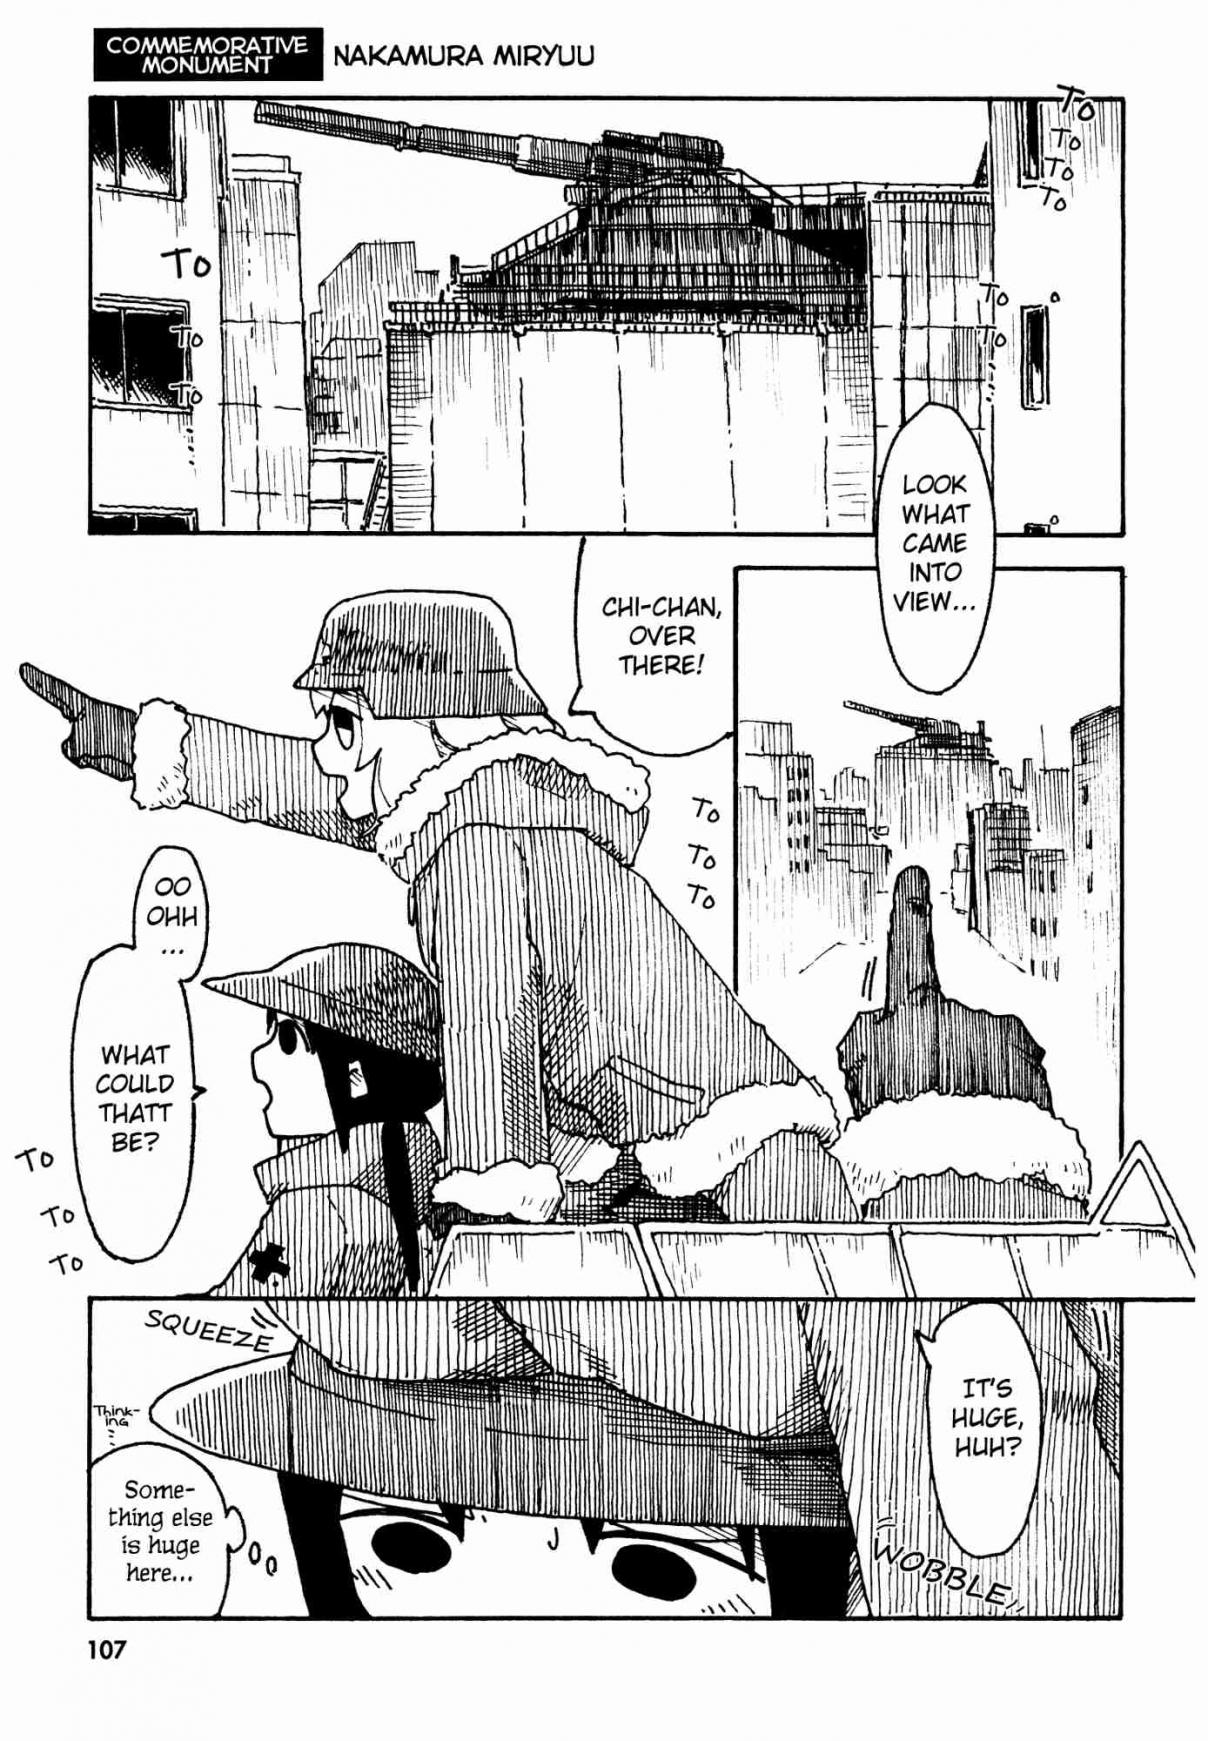 Girls' Last Tour Official Anthology Comic Vol. 1 Ch. 14 Commemorative Monument by Nakamura Miryuu